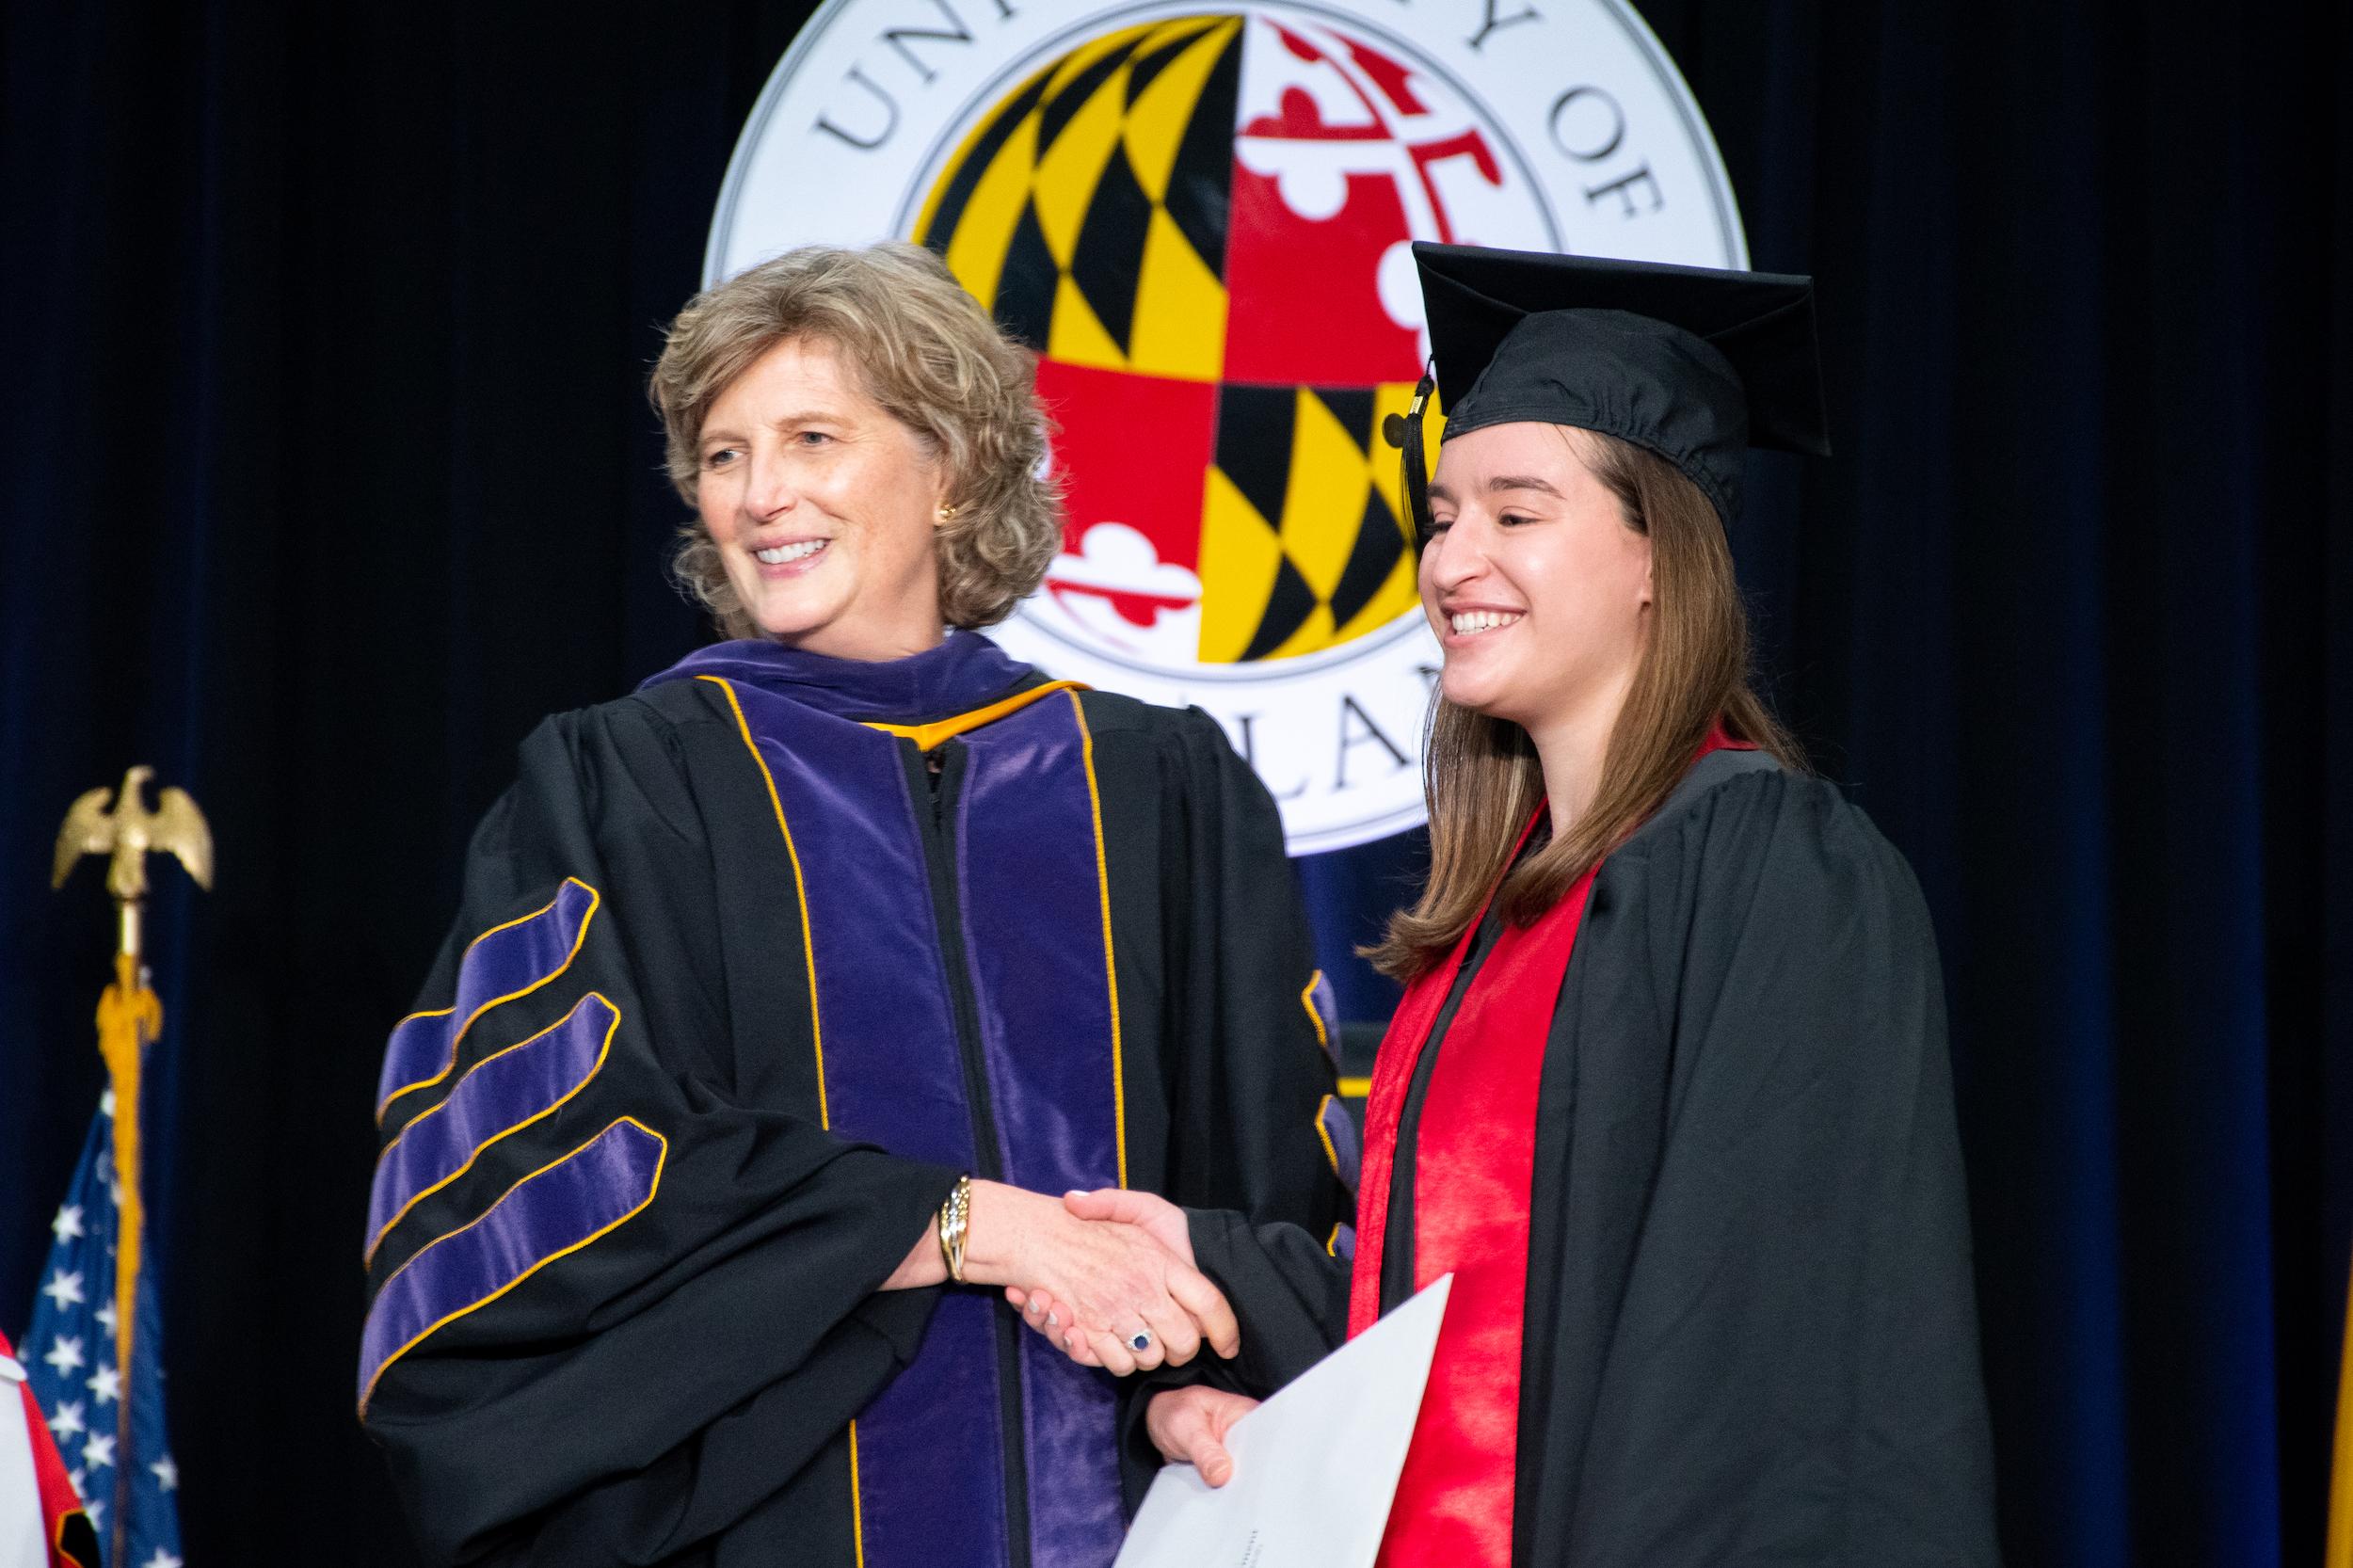 Merrill student, Lucy Dalglish at commencement